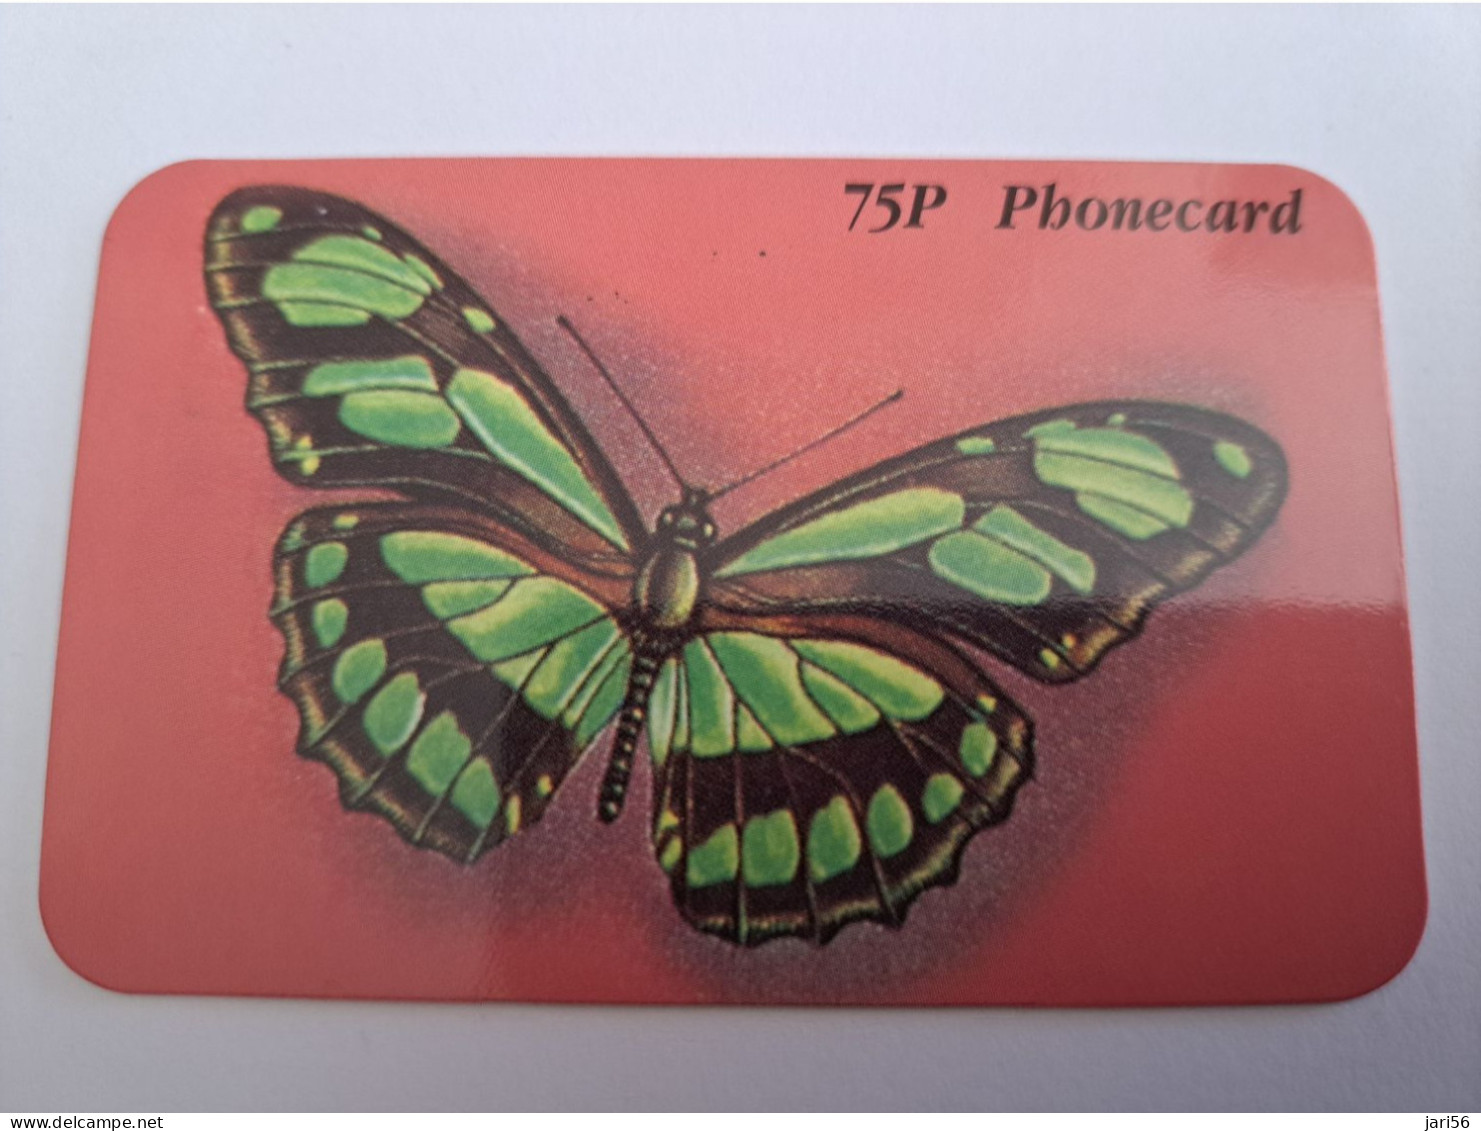 GREAT BRITAIN  / DISCOUNT PHONECARD/BUTTERFLY / 75 PENCE    PREPAID CARD / MINT      **13586** - Verzamelingen